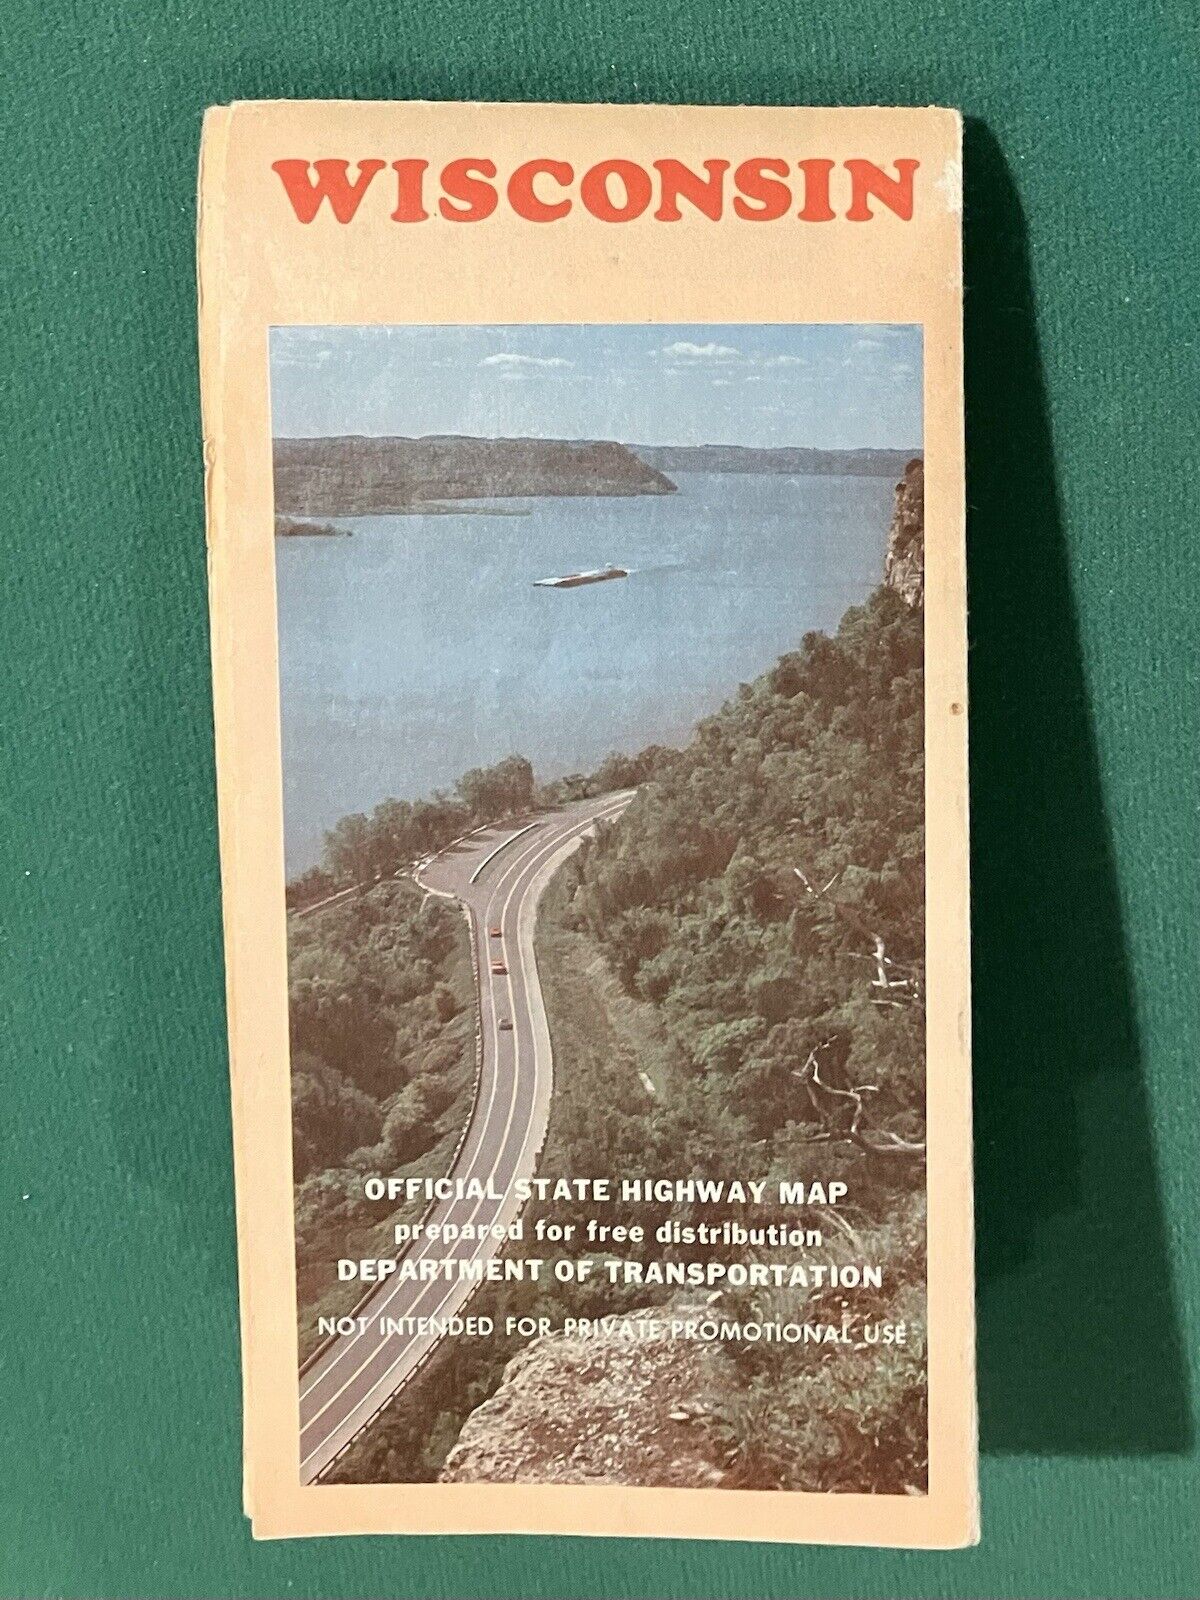 Vintage 1985 Wisconsin Official State Highway Map, 30” X 26”